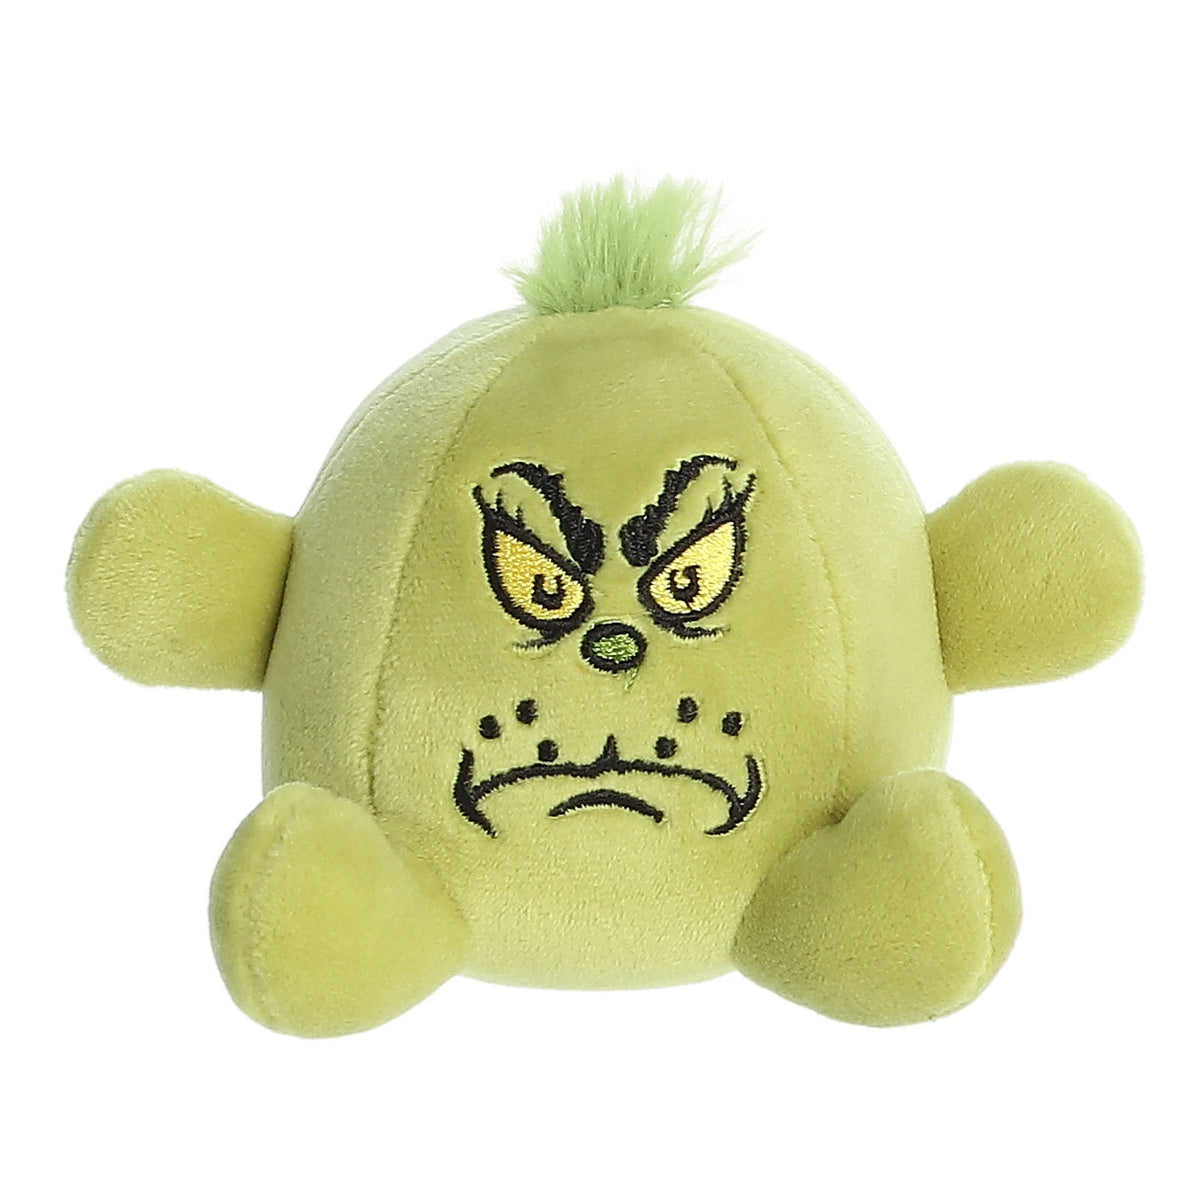 Soft Grinch stress ball Dr. Seuss plush with iconic scowl and "You're A Mean One" embroidered on the back.